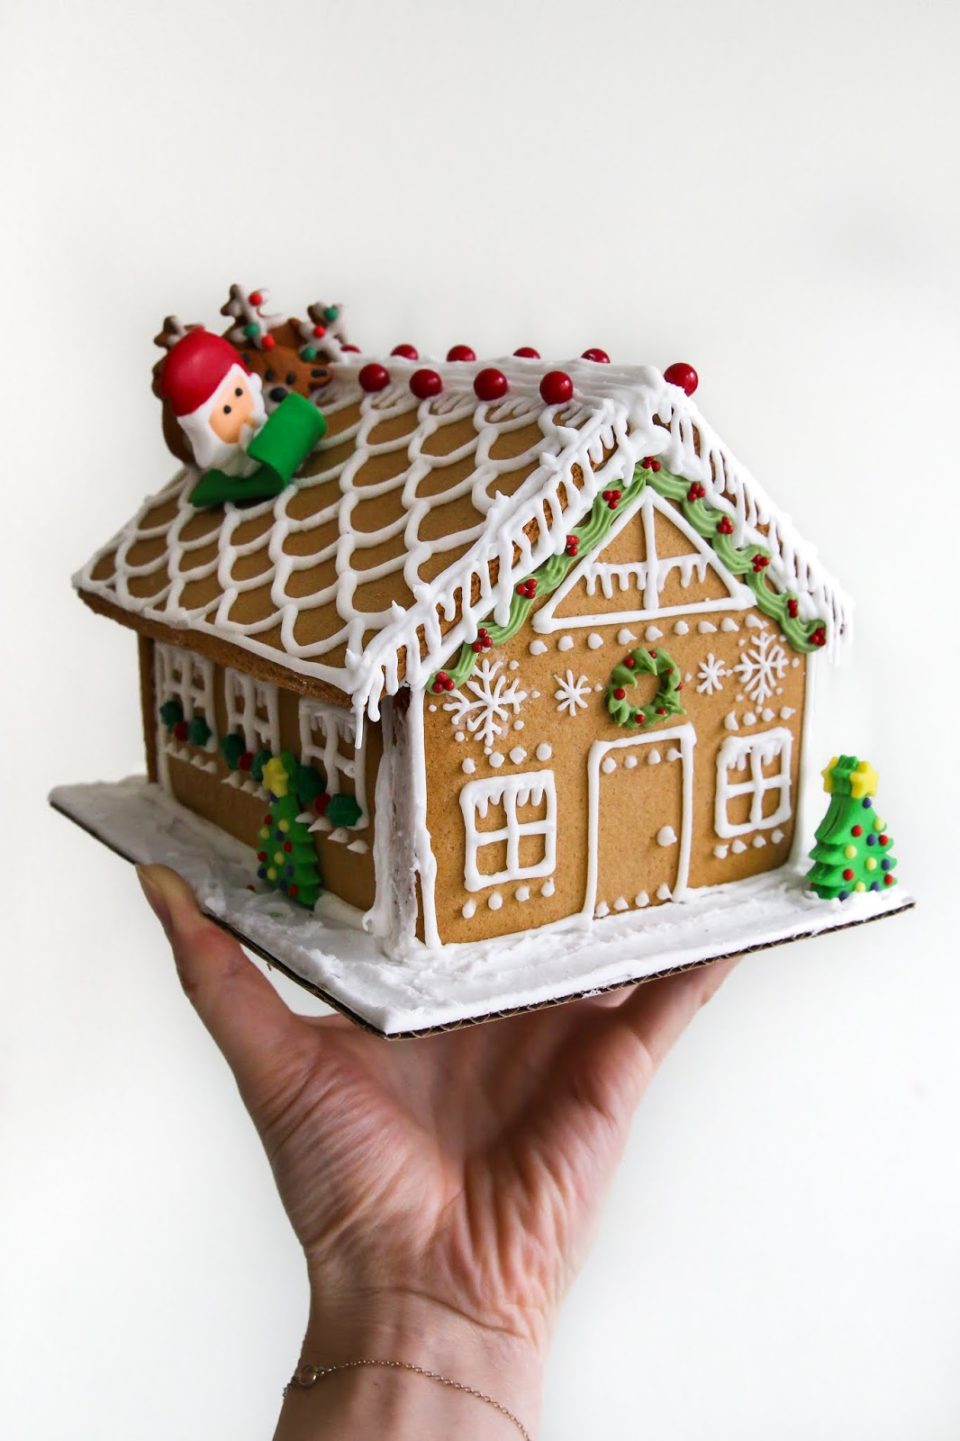 10 Creative Gingerbread House Wreath Ideas To Spruce Up Your Holiday Decor